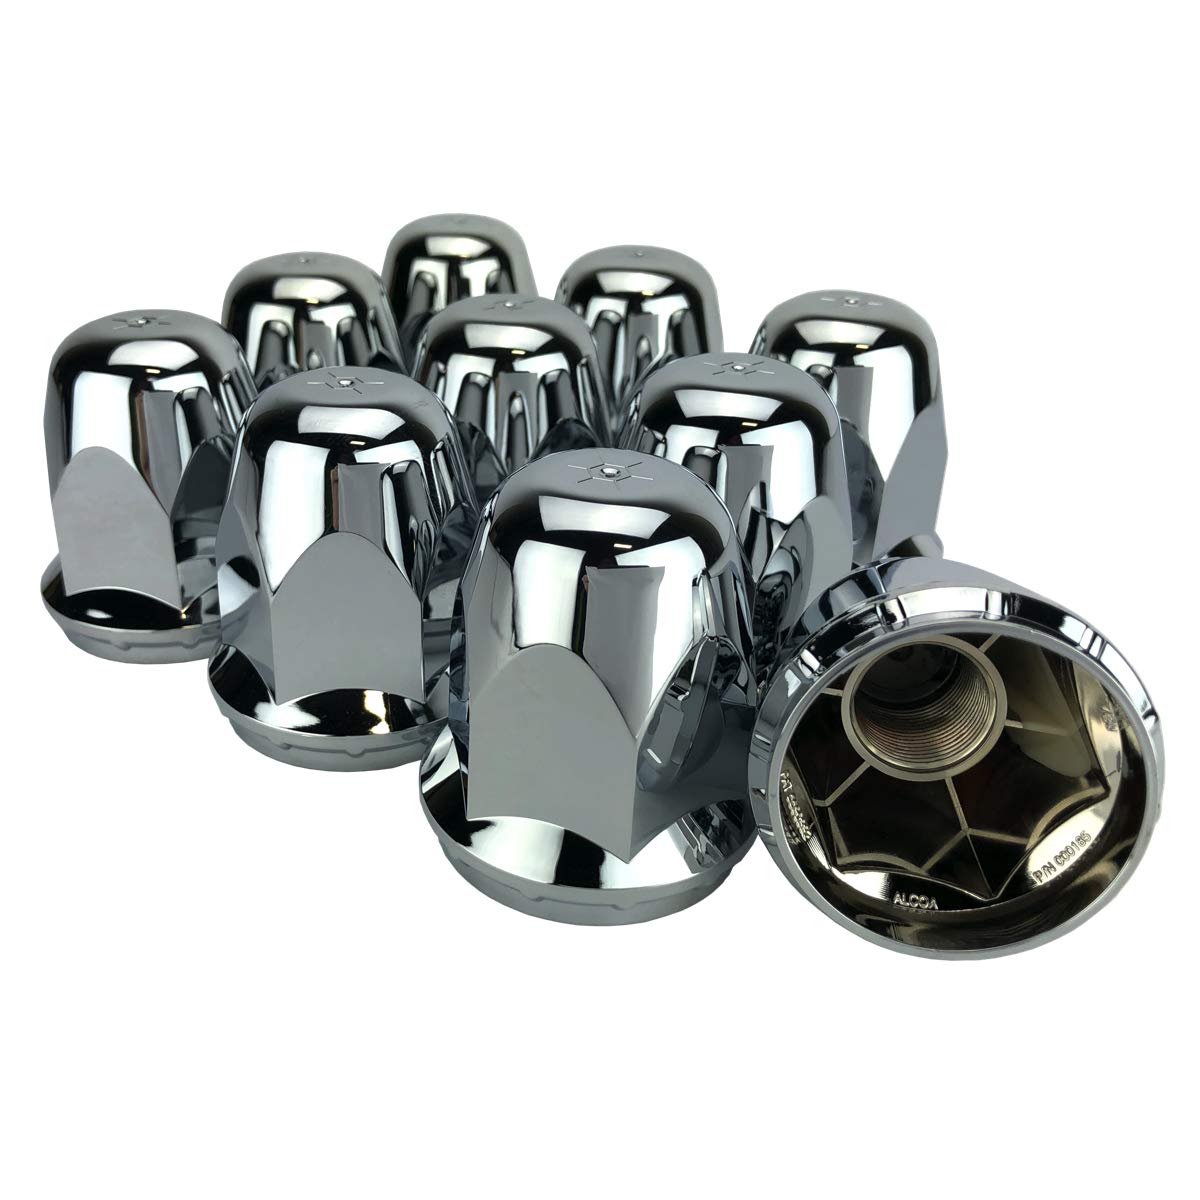 ALCOA 10 33mm Chrome Screw On Hex Lug Nut Covers with Flange for hub Covers